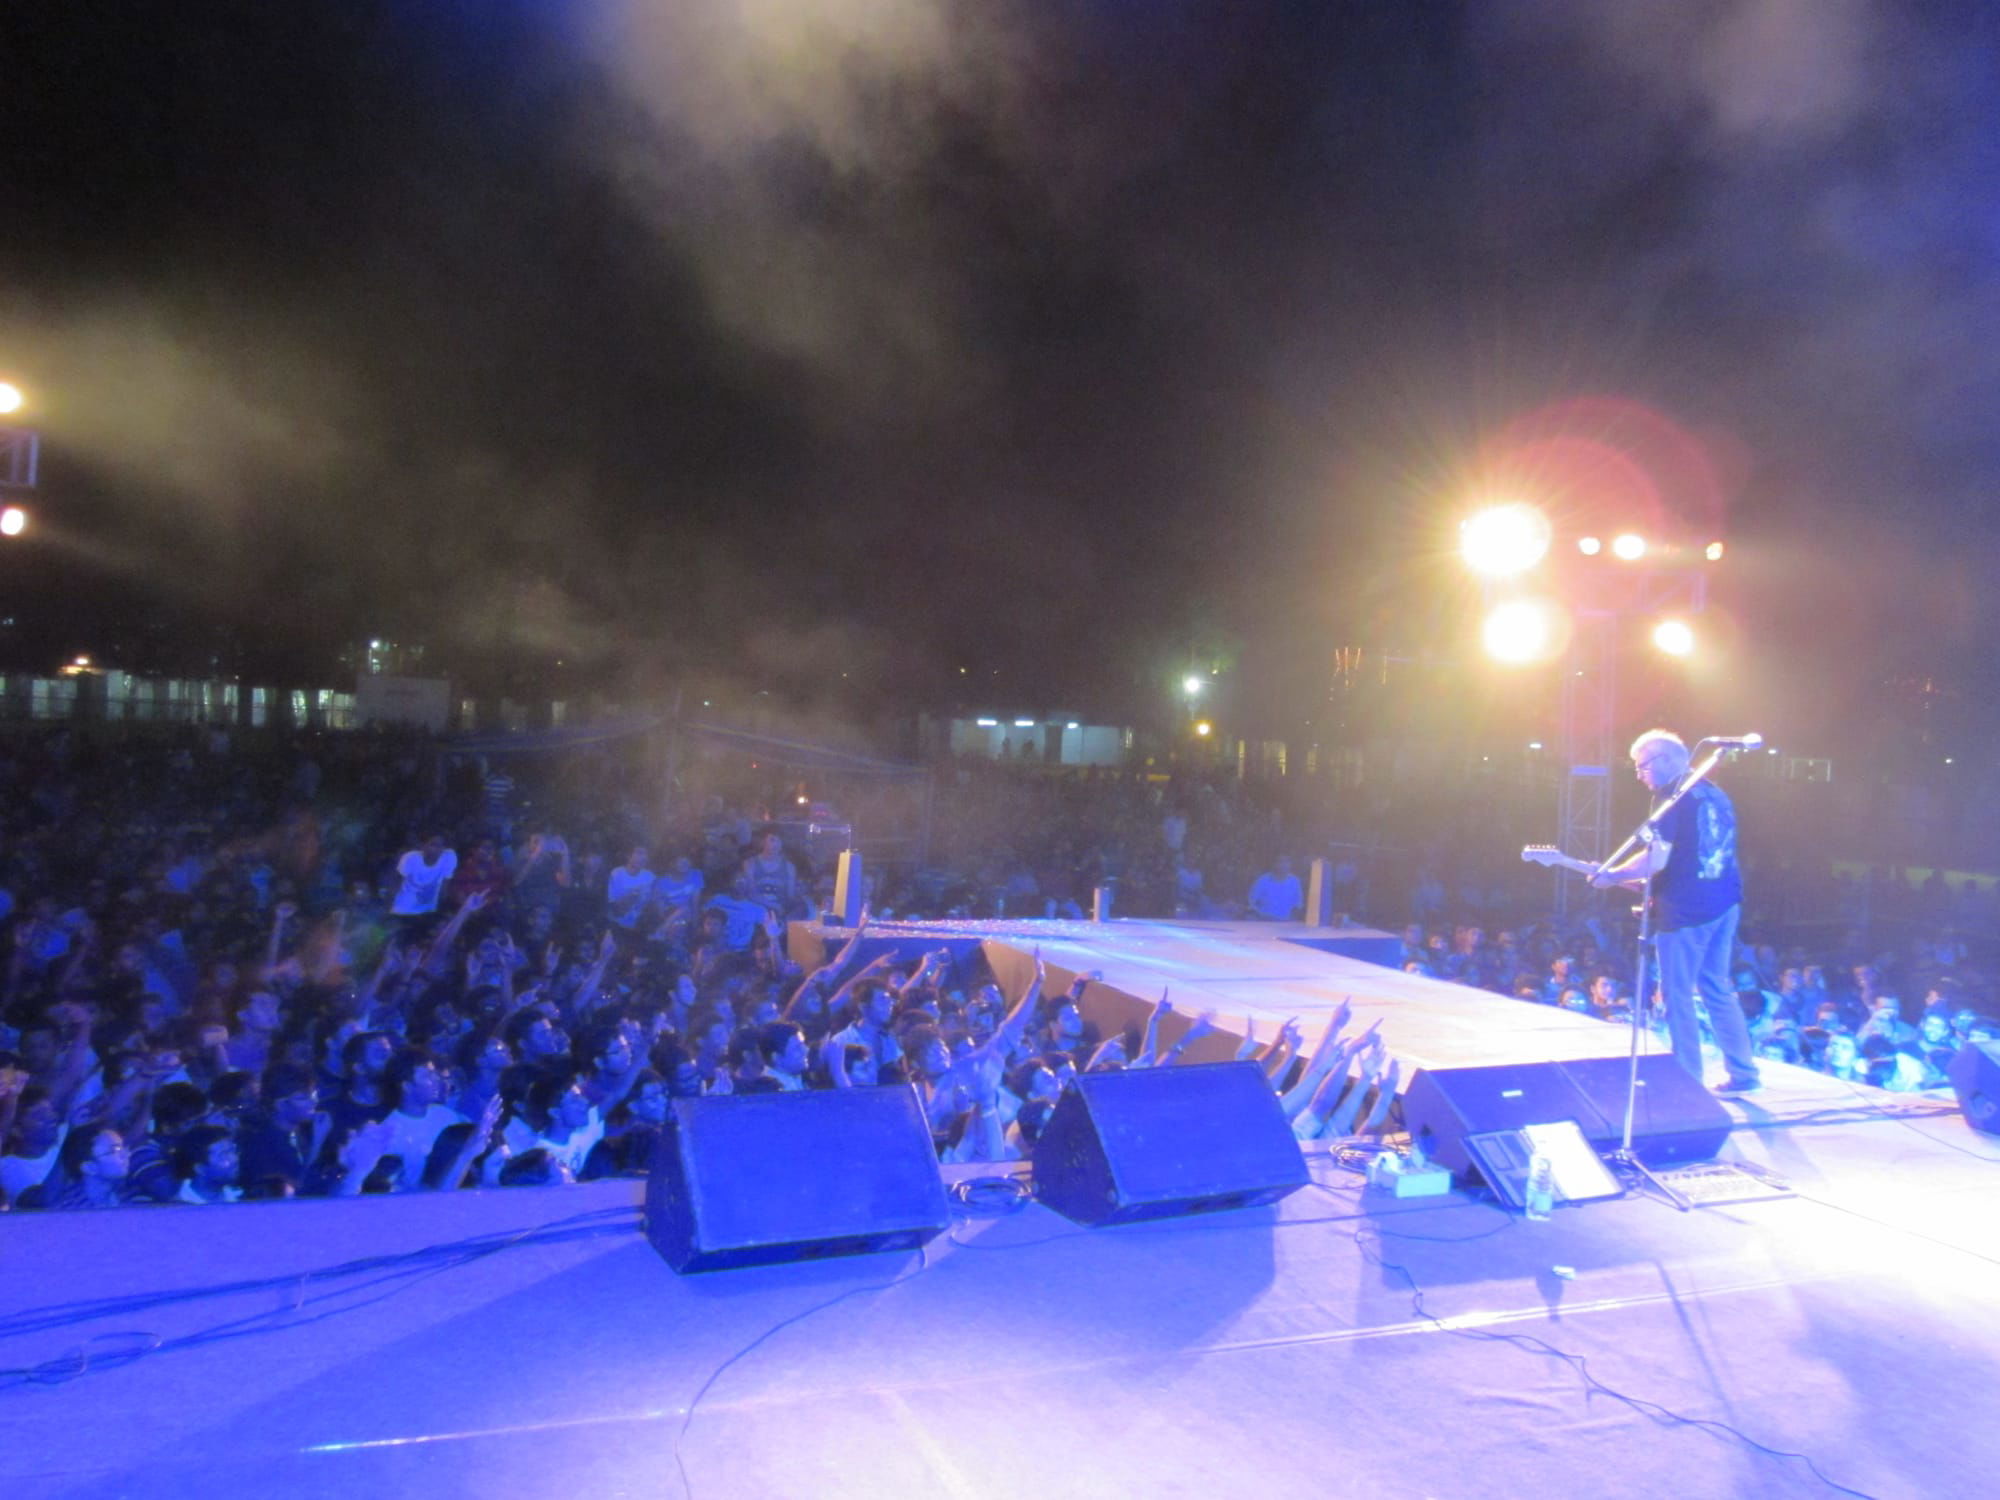 On stage in India